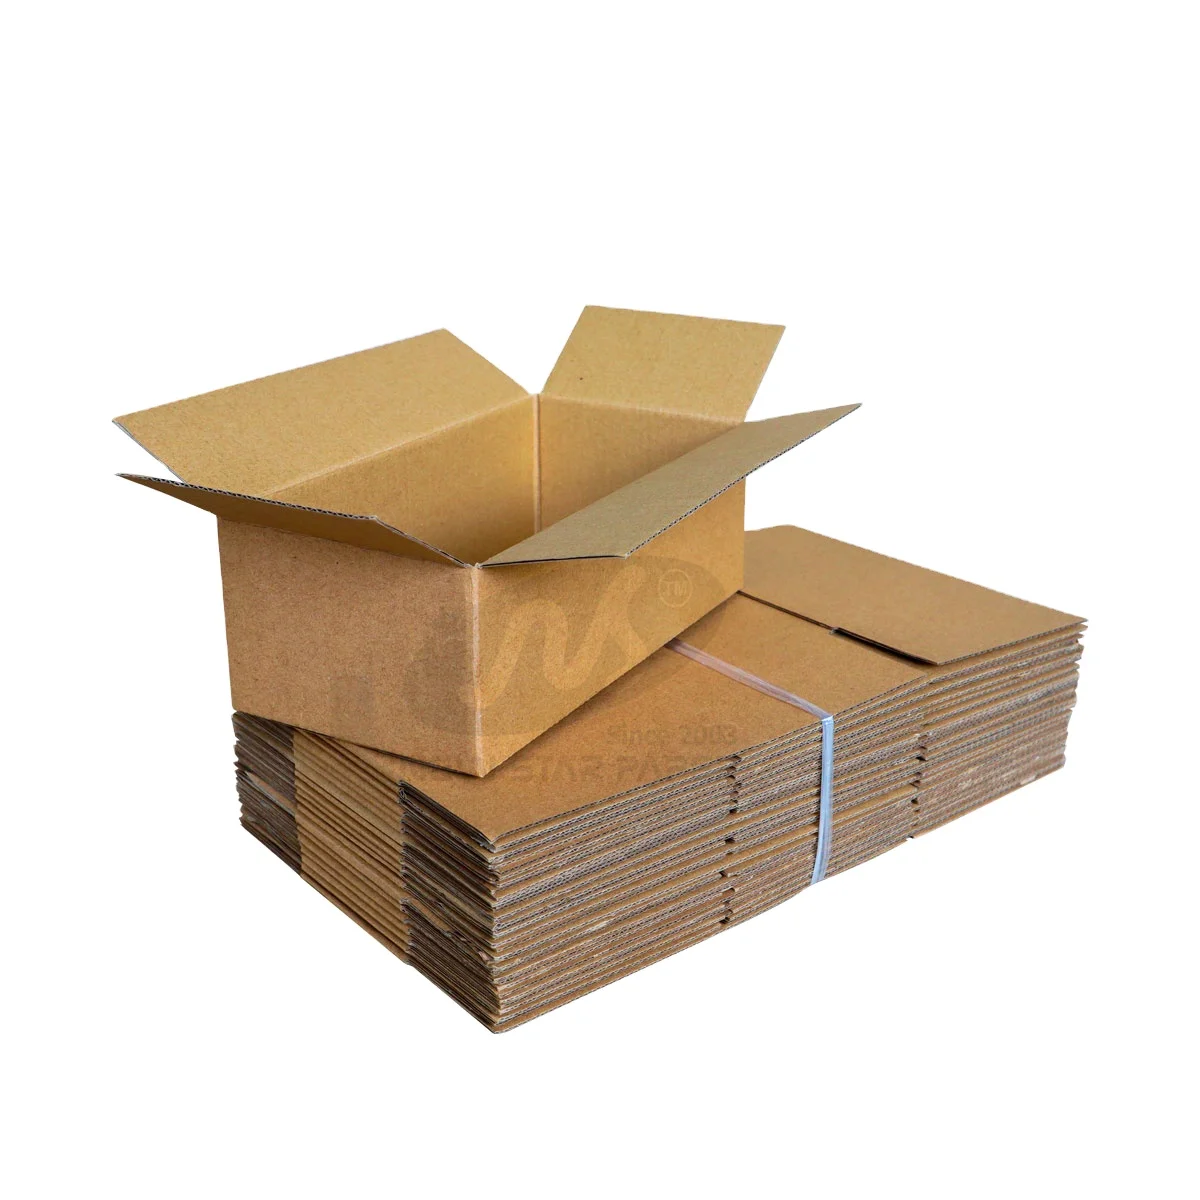 Factory Price OEM/ODM Paper Boxes Originated From Viet Nam Manufacturer